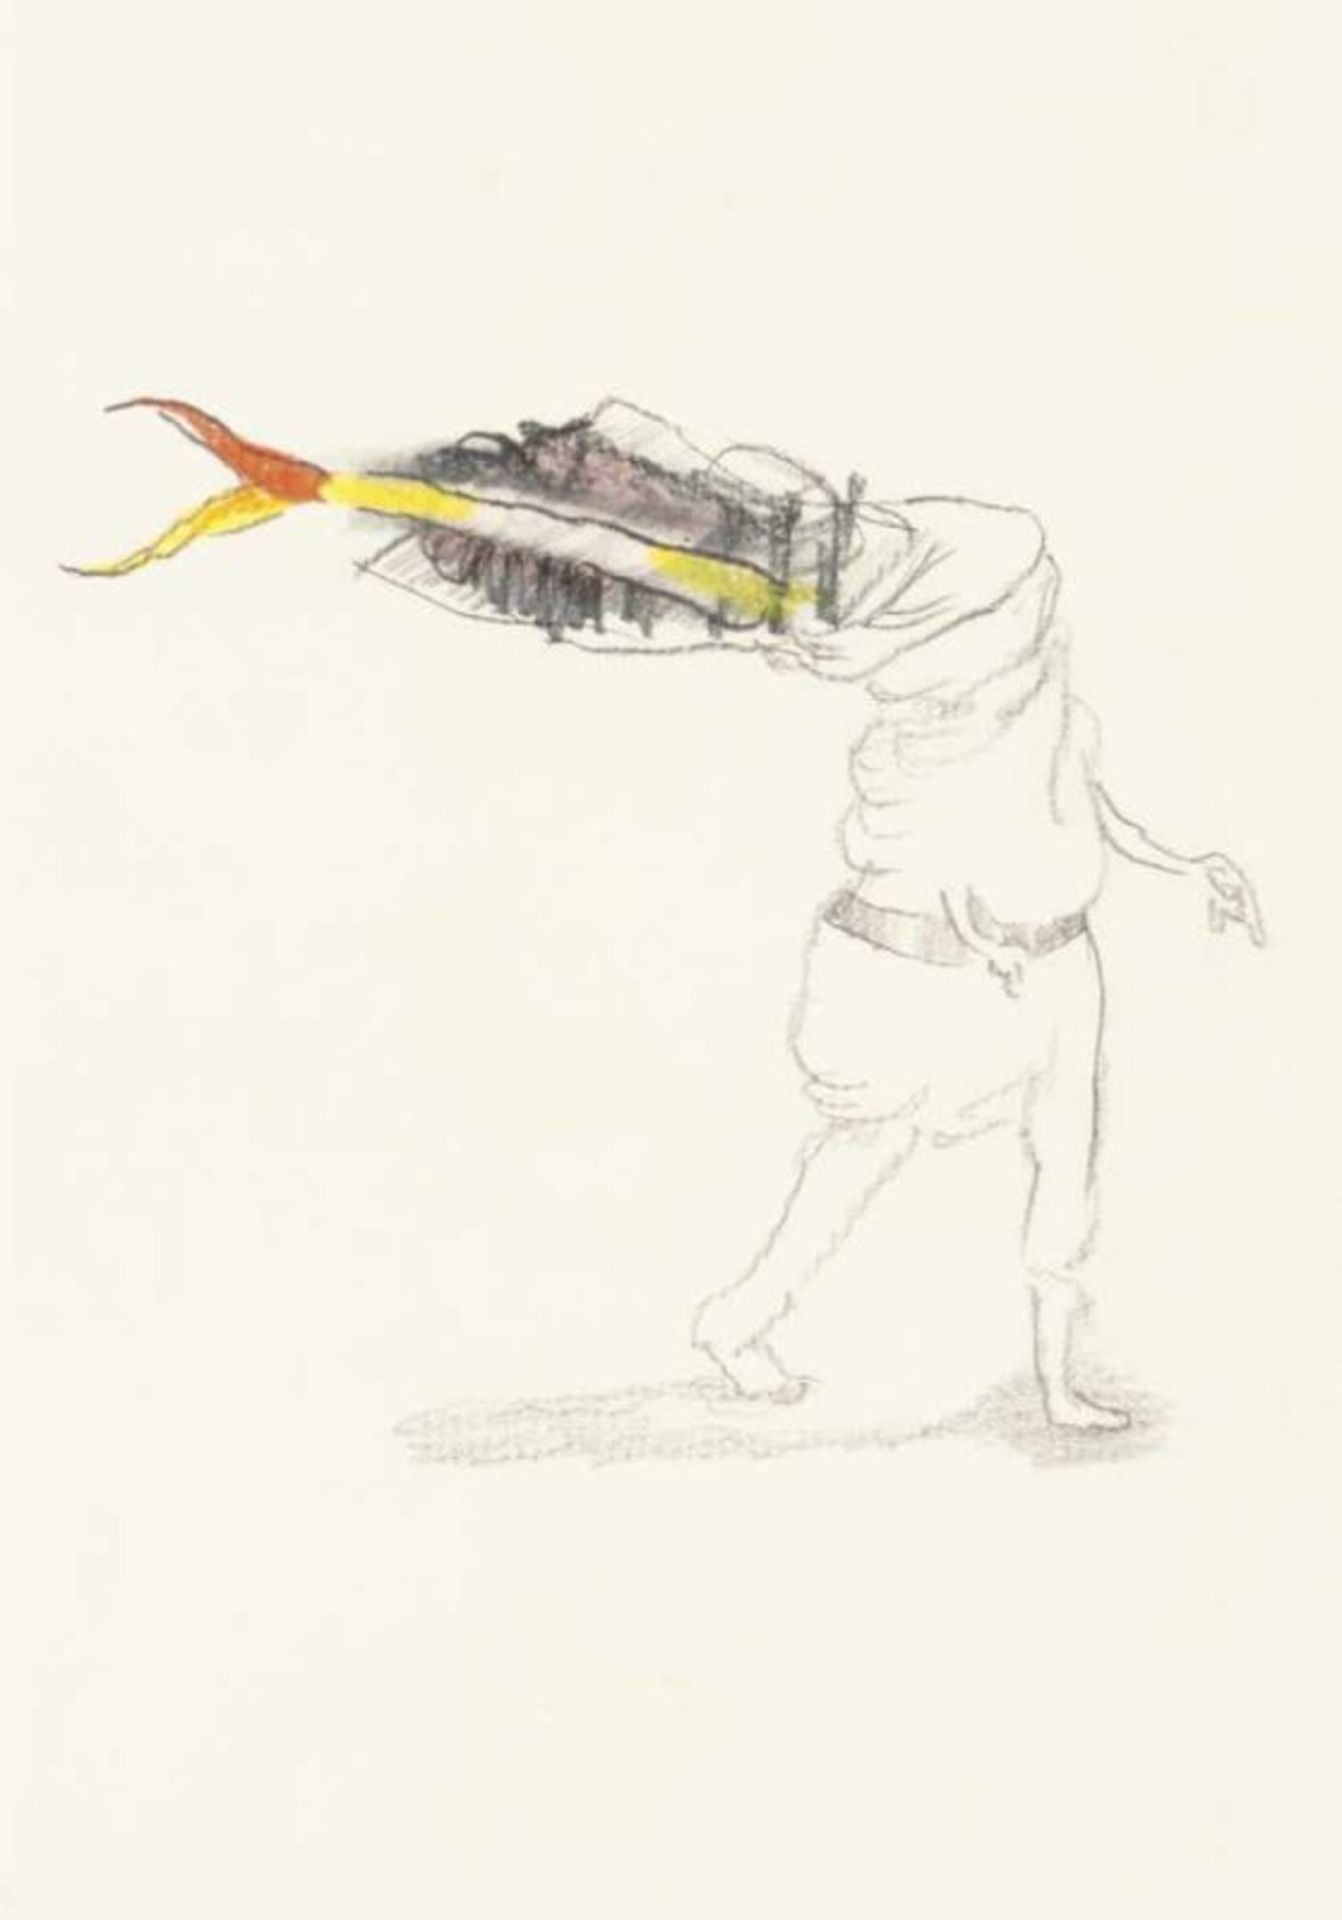 Jorge Queiroz (n. 1966)UntitledGraphite and colored pencil on paperSigned and dated 98 on the